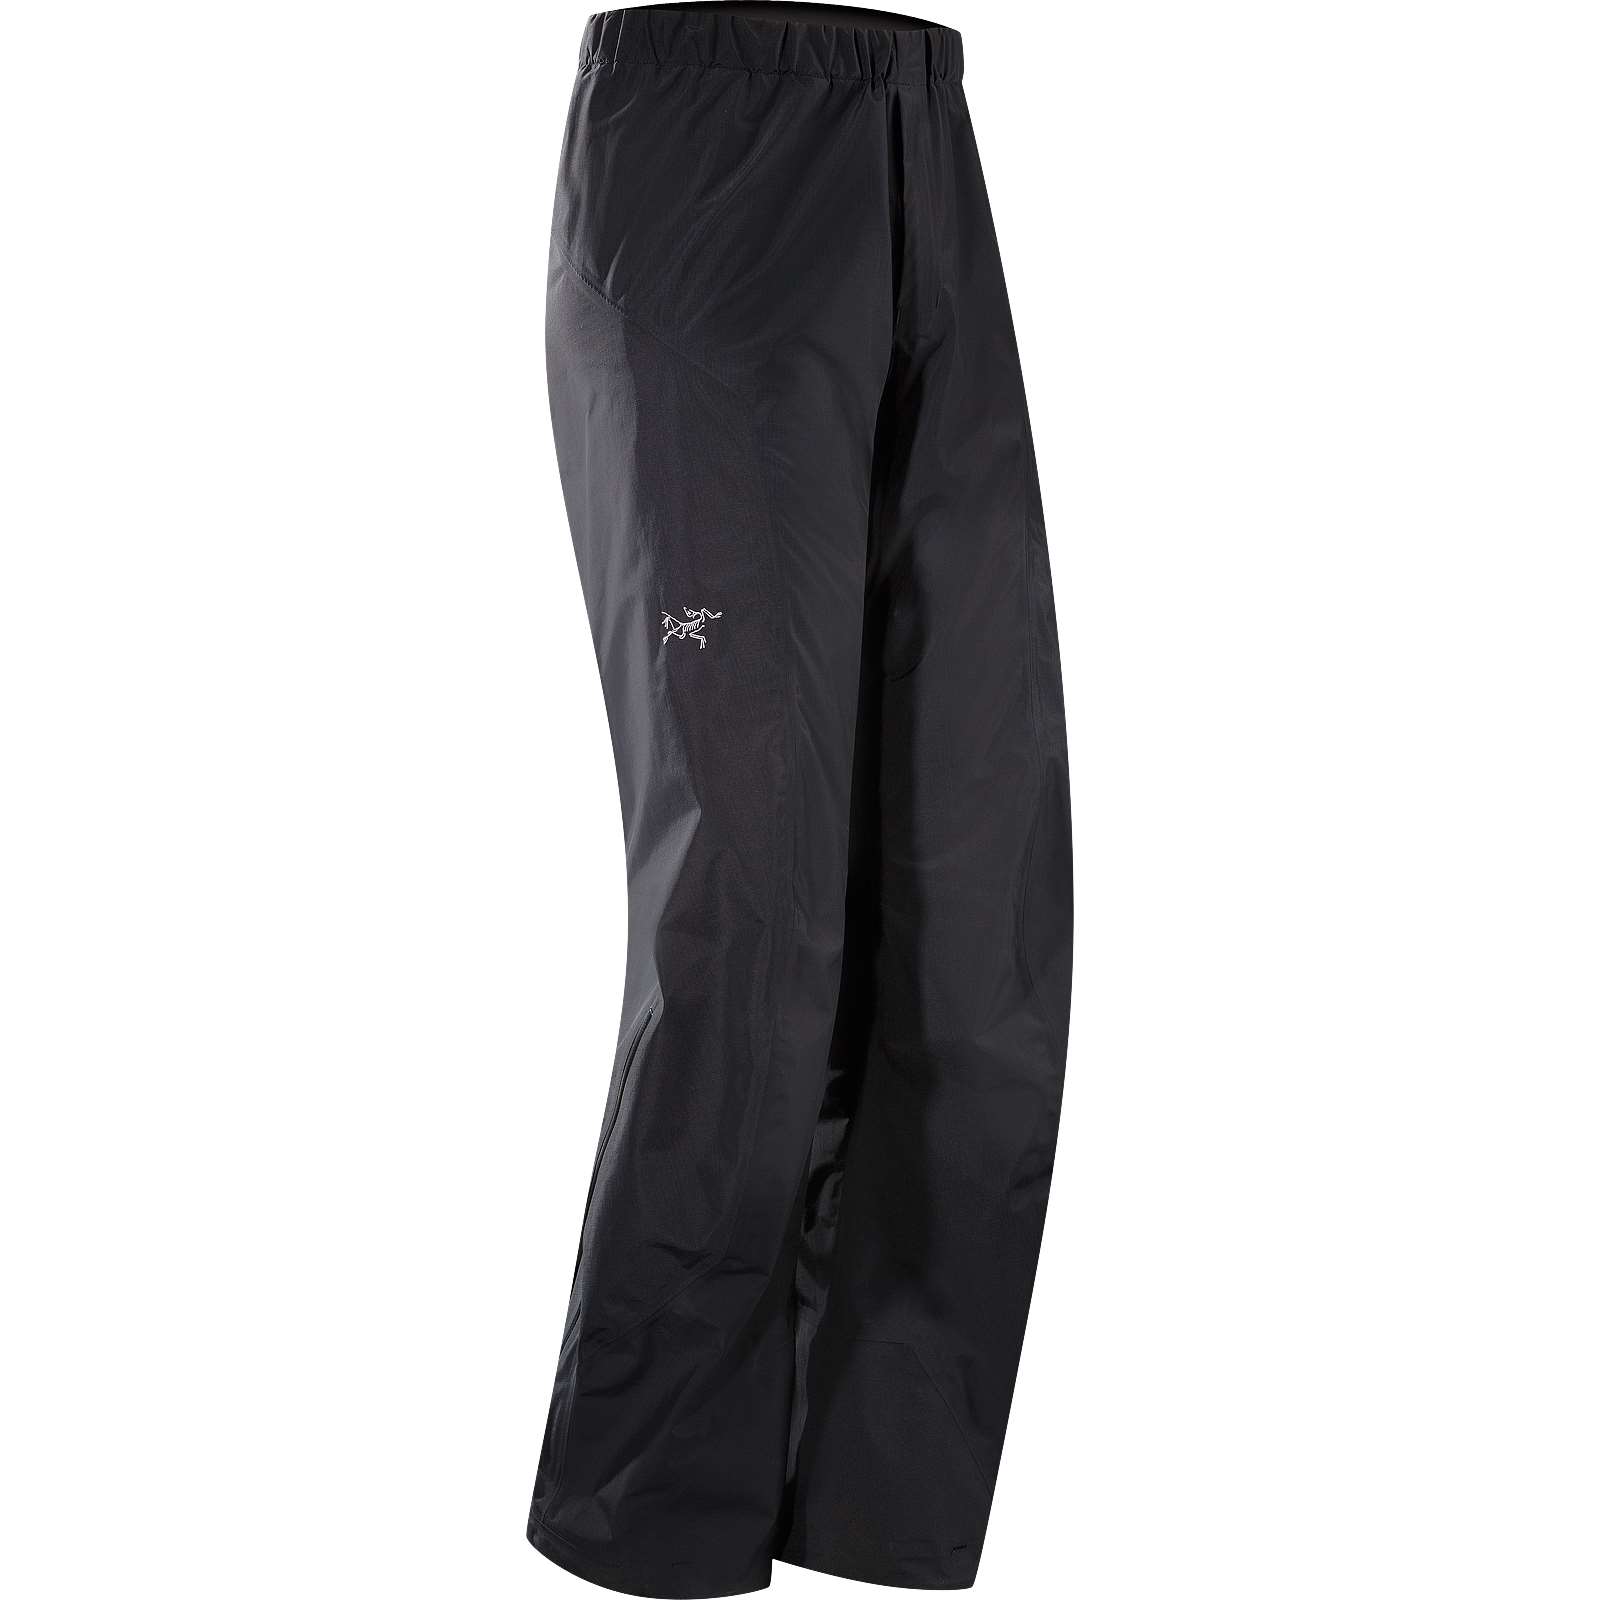 Buy Arc'teryx Beta Sl Pant Men's from Outnorth